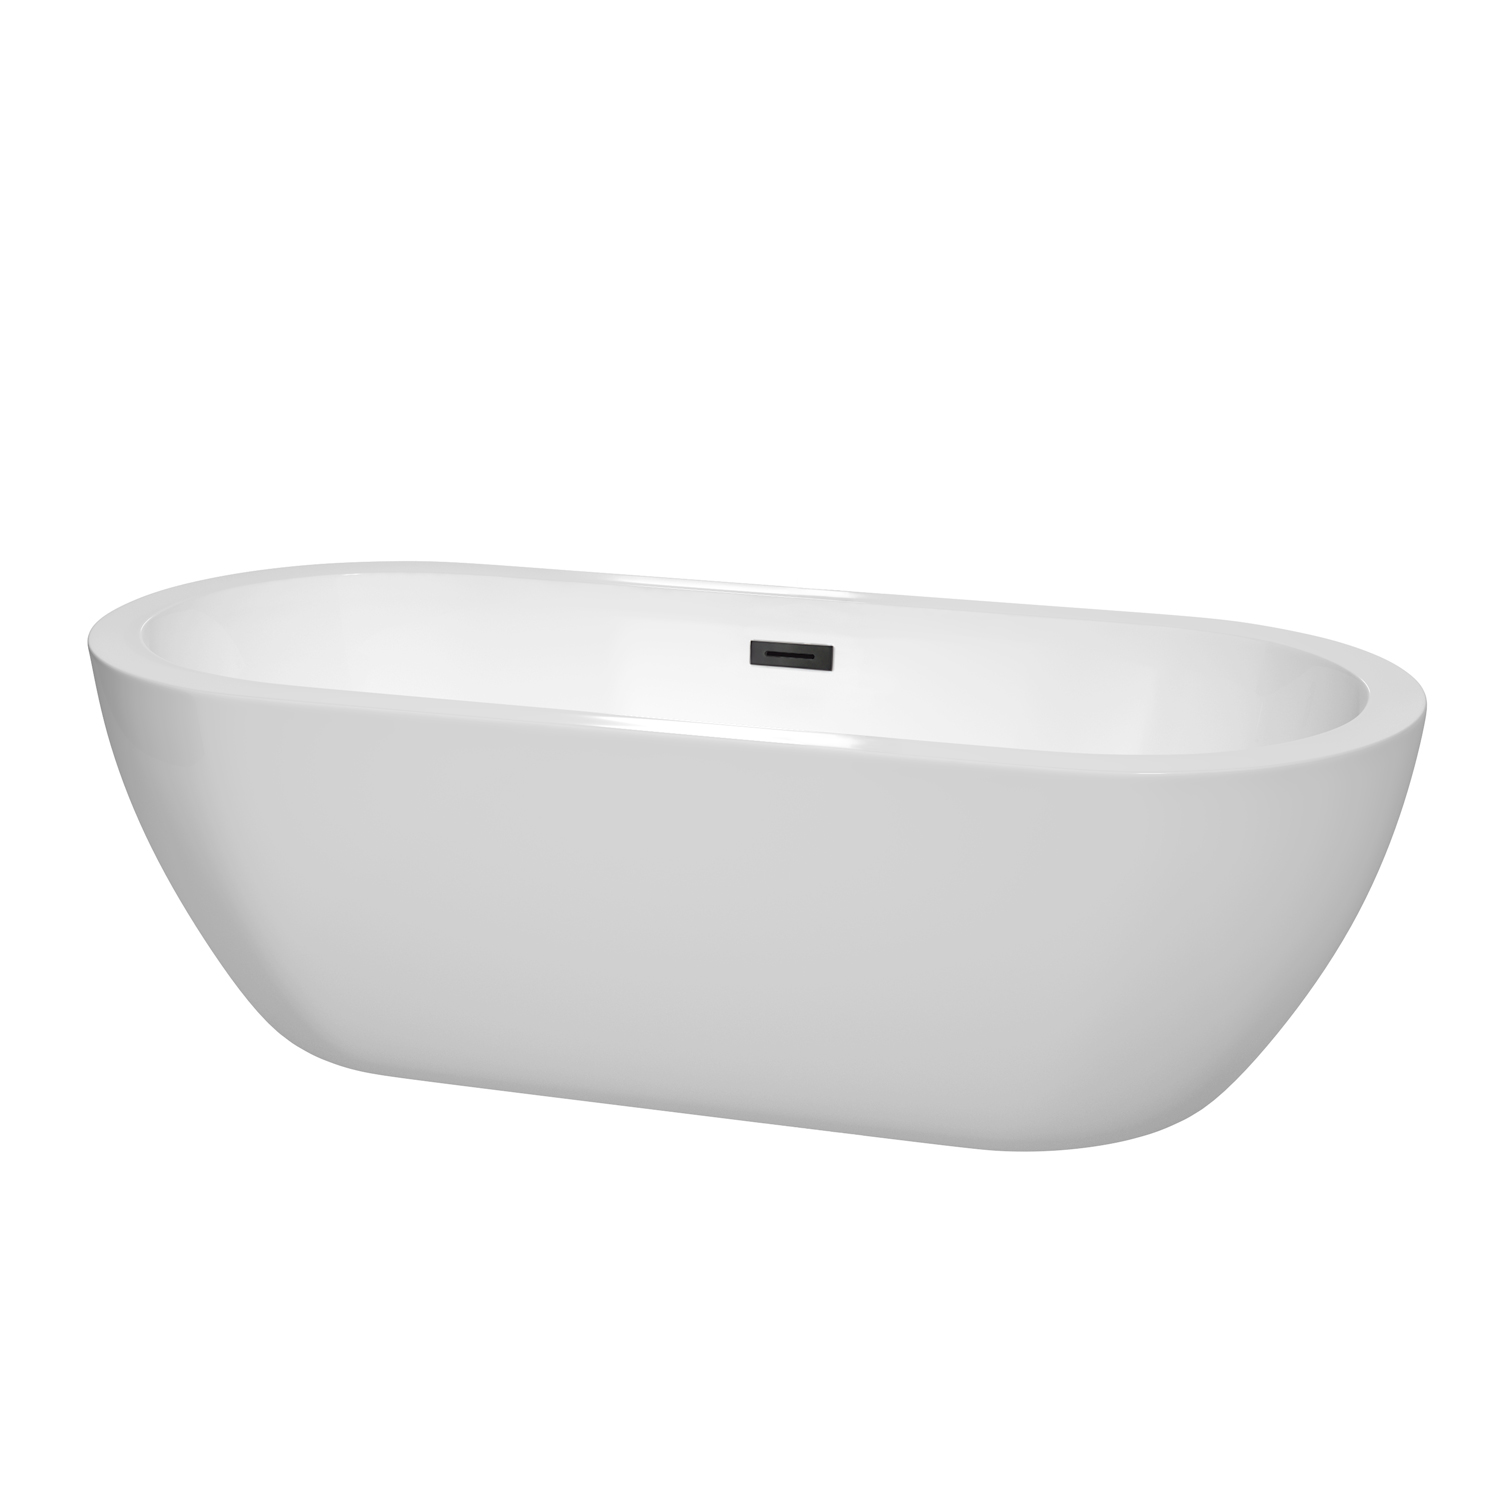 72" Freestanding Bathtub in White with Matte Black Drain and Overflow Trim